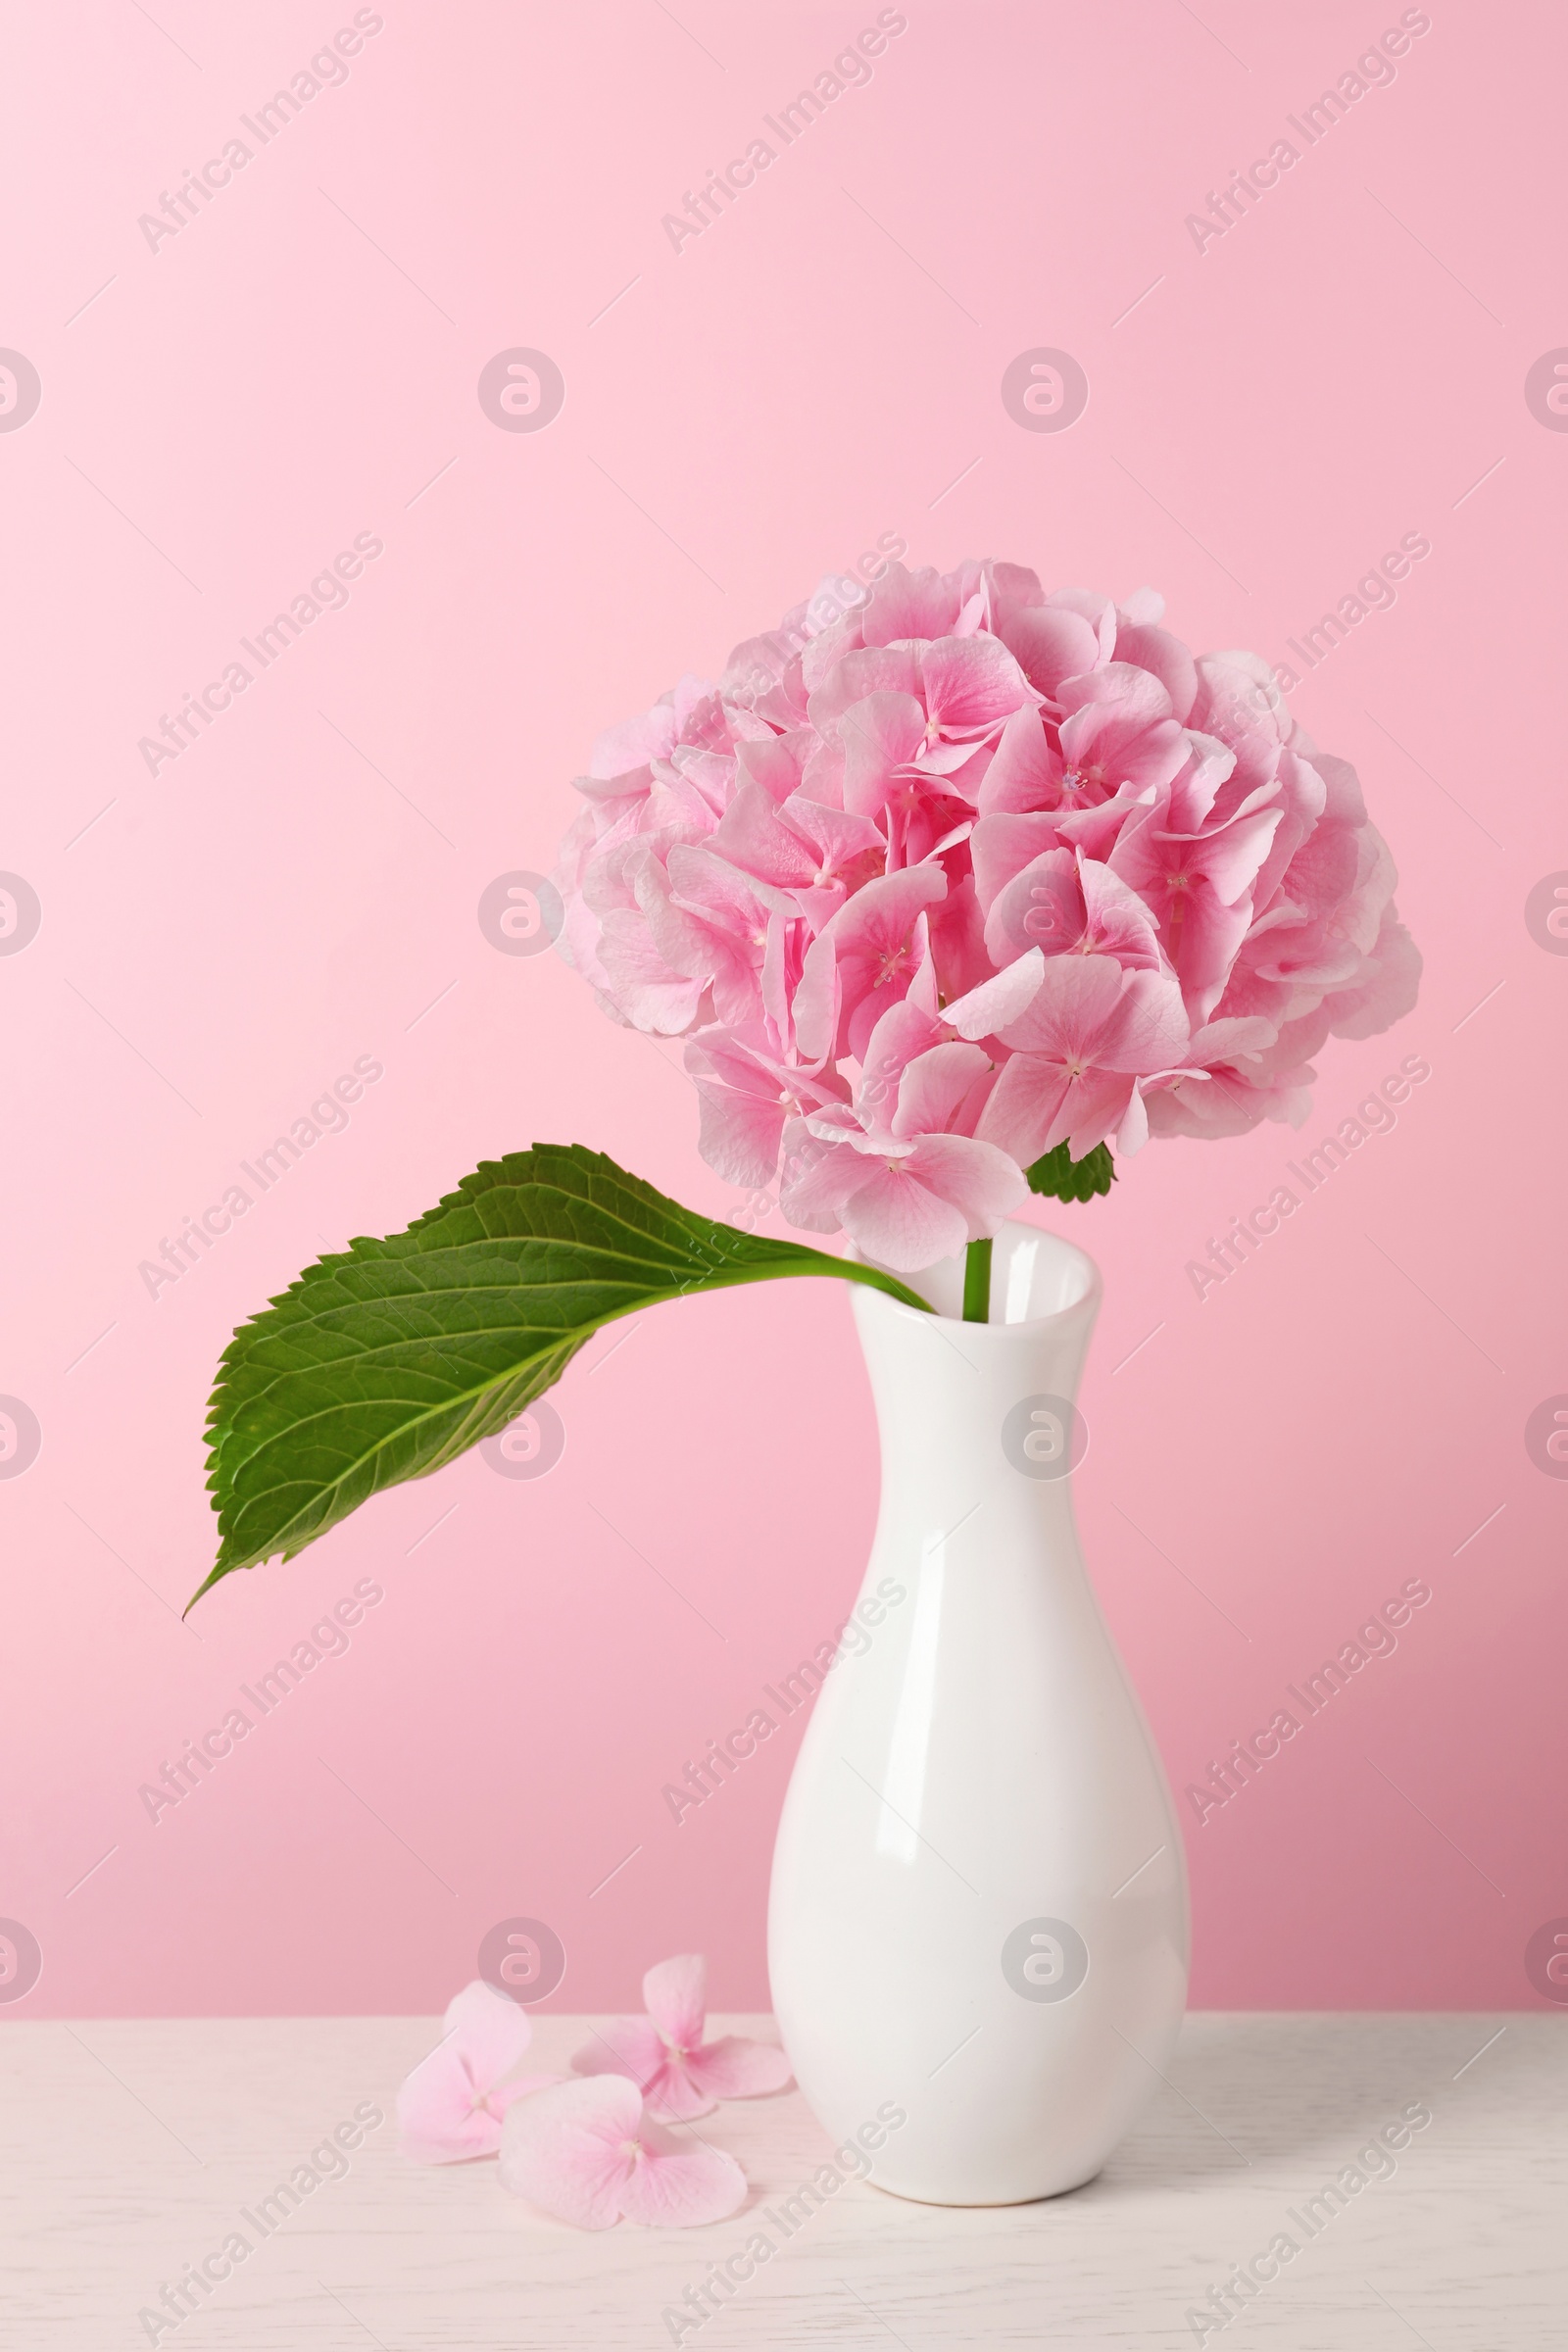 Photo of Vase with beautiful hortensia flowers on white wooden table against pink background